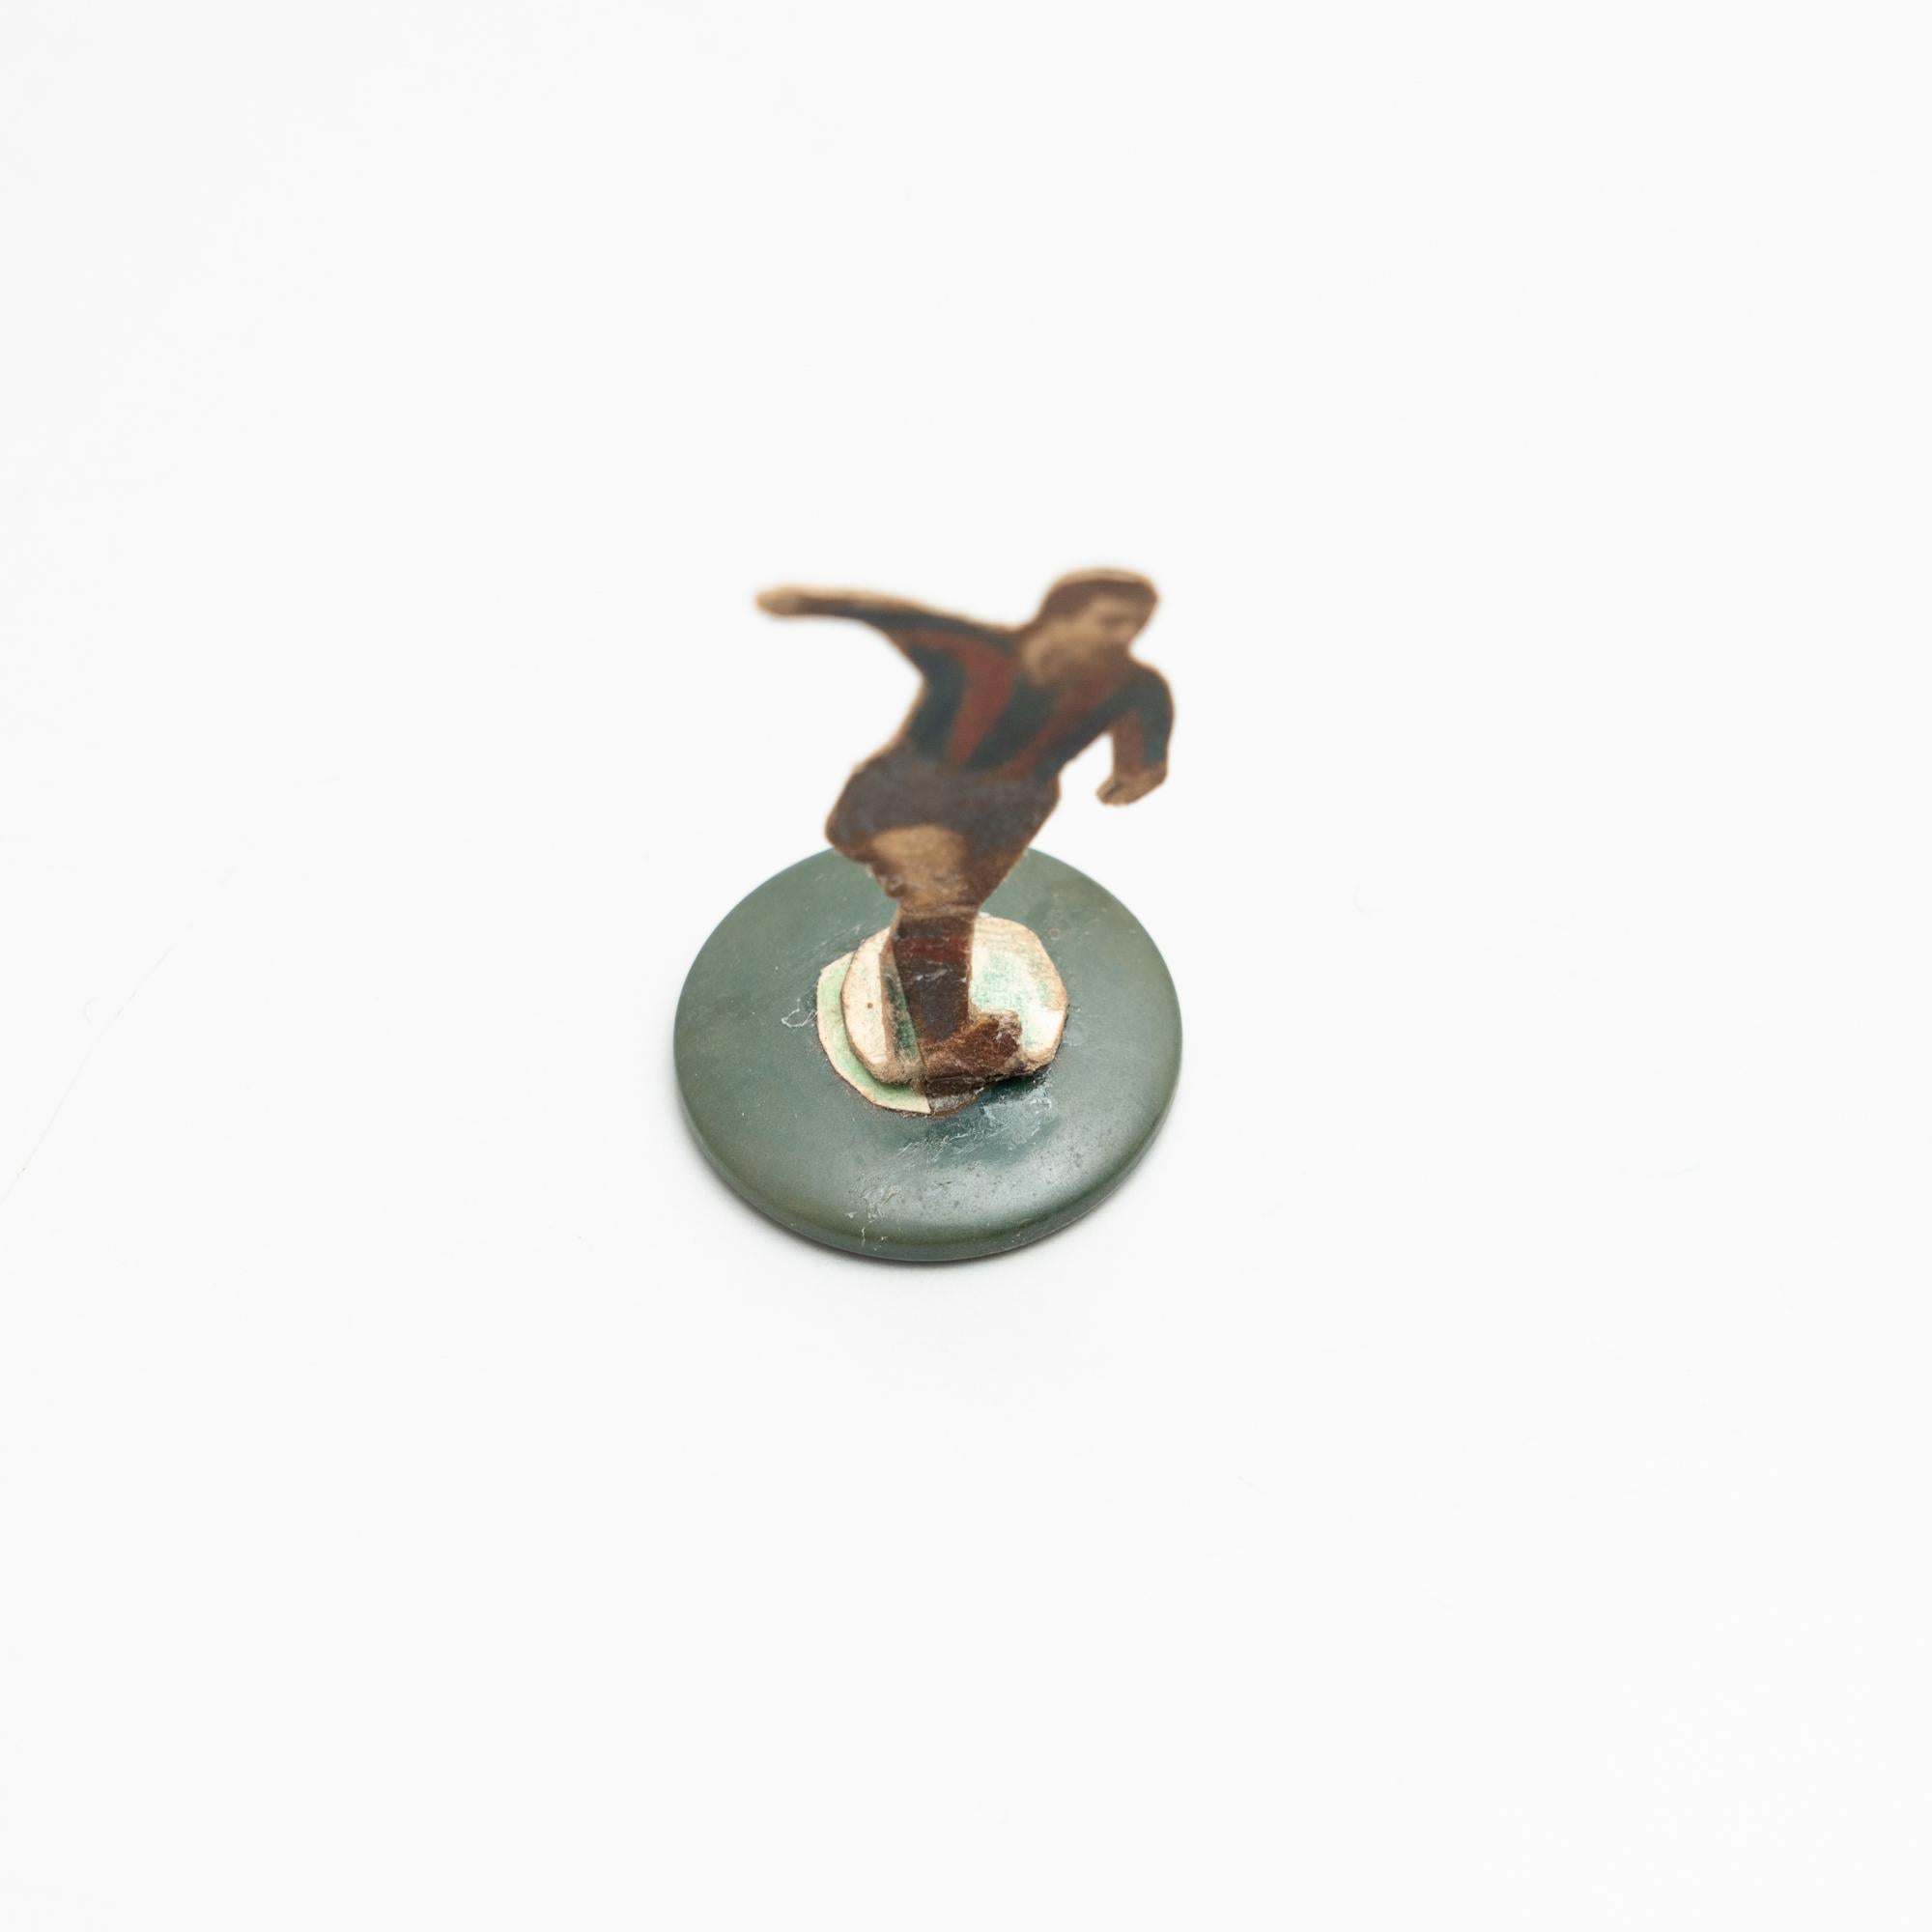 Traditional Antique Button Soccer Game Figure, circa 1950 For Sale 3